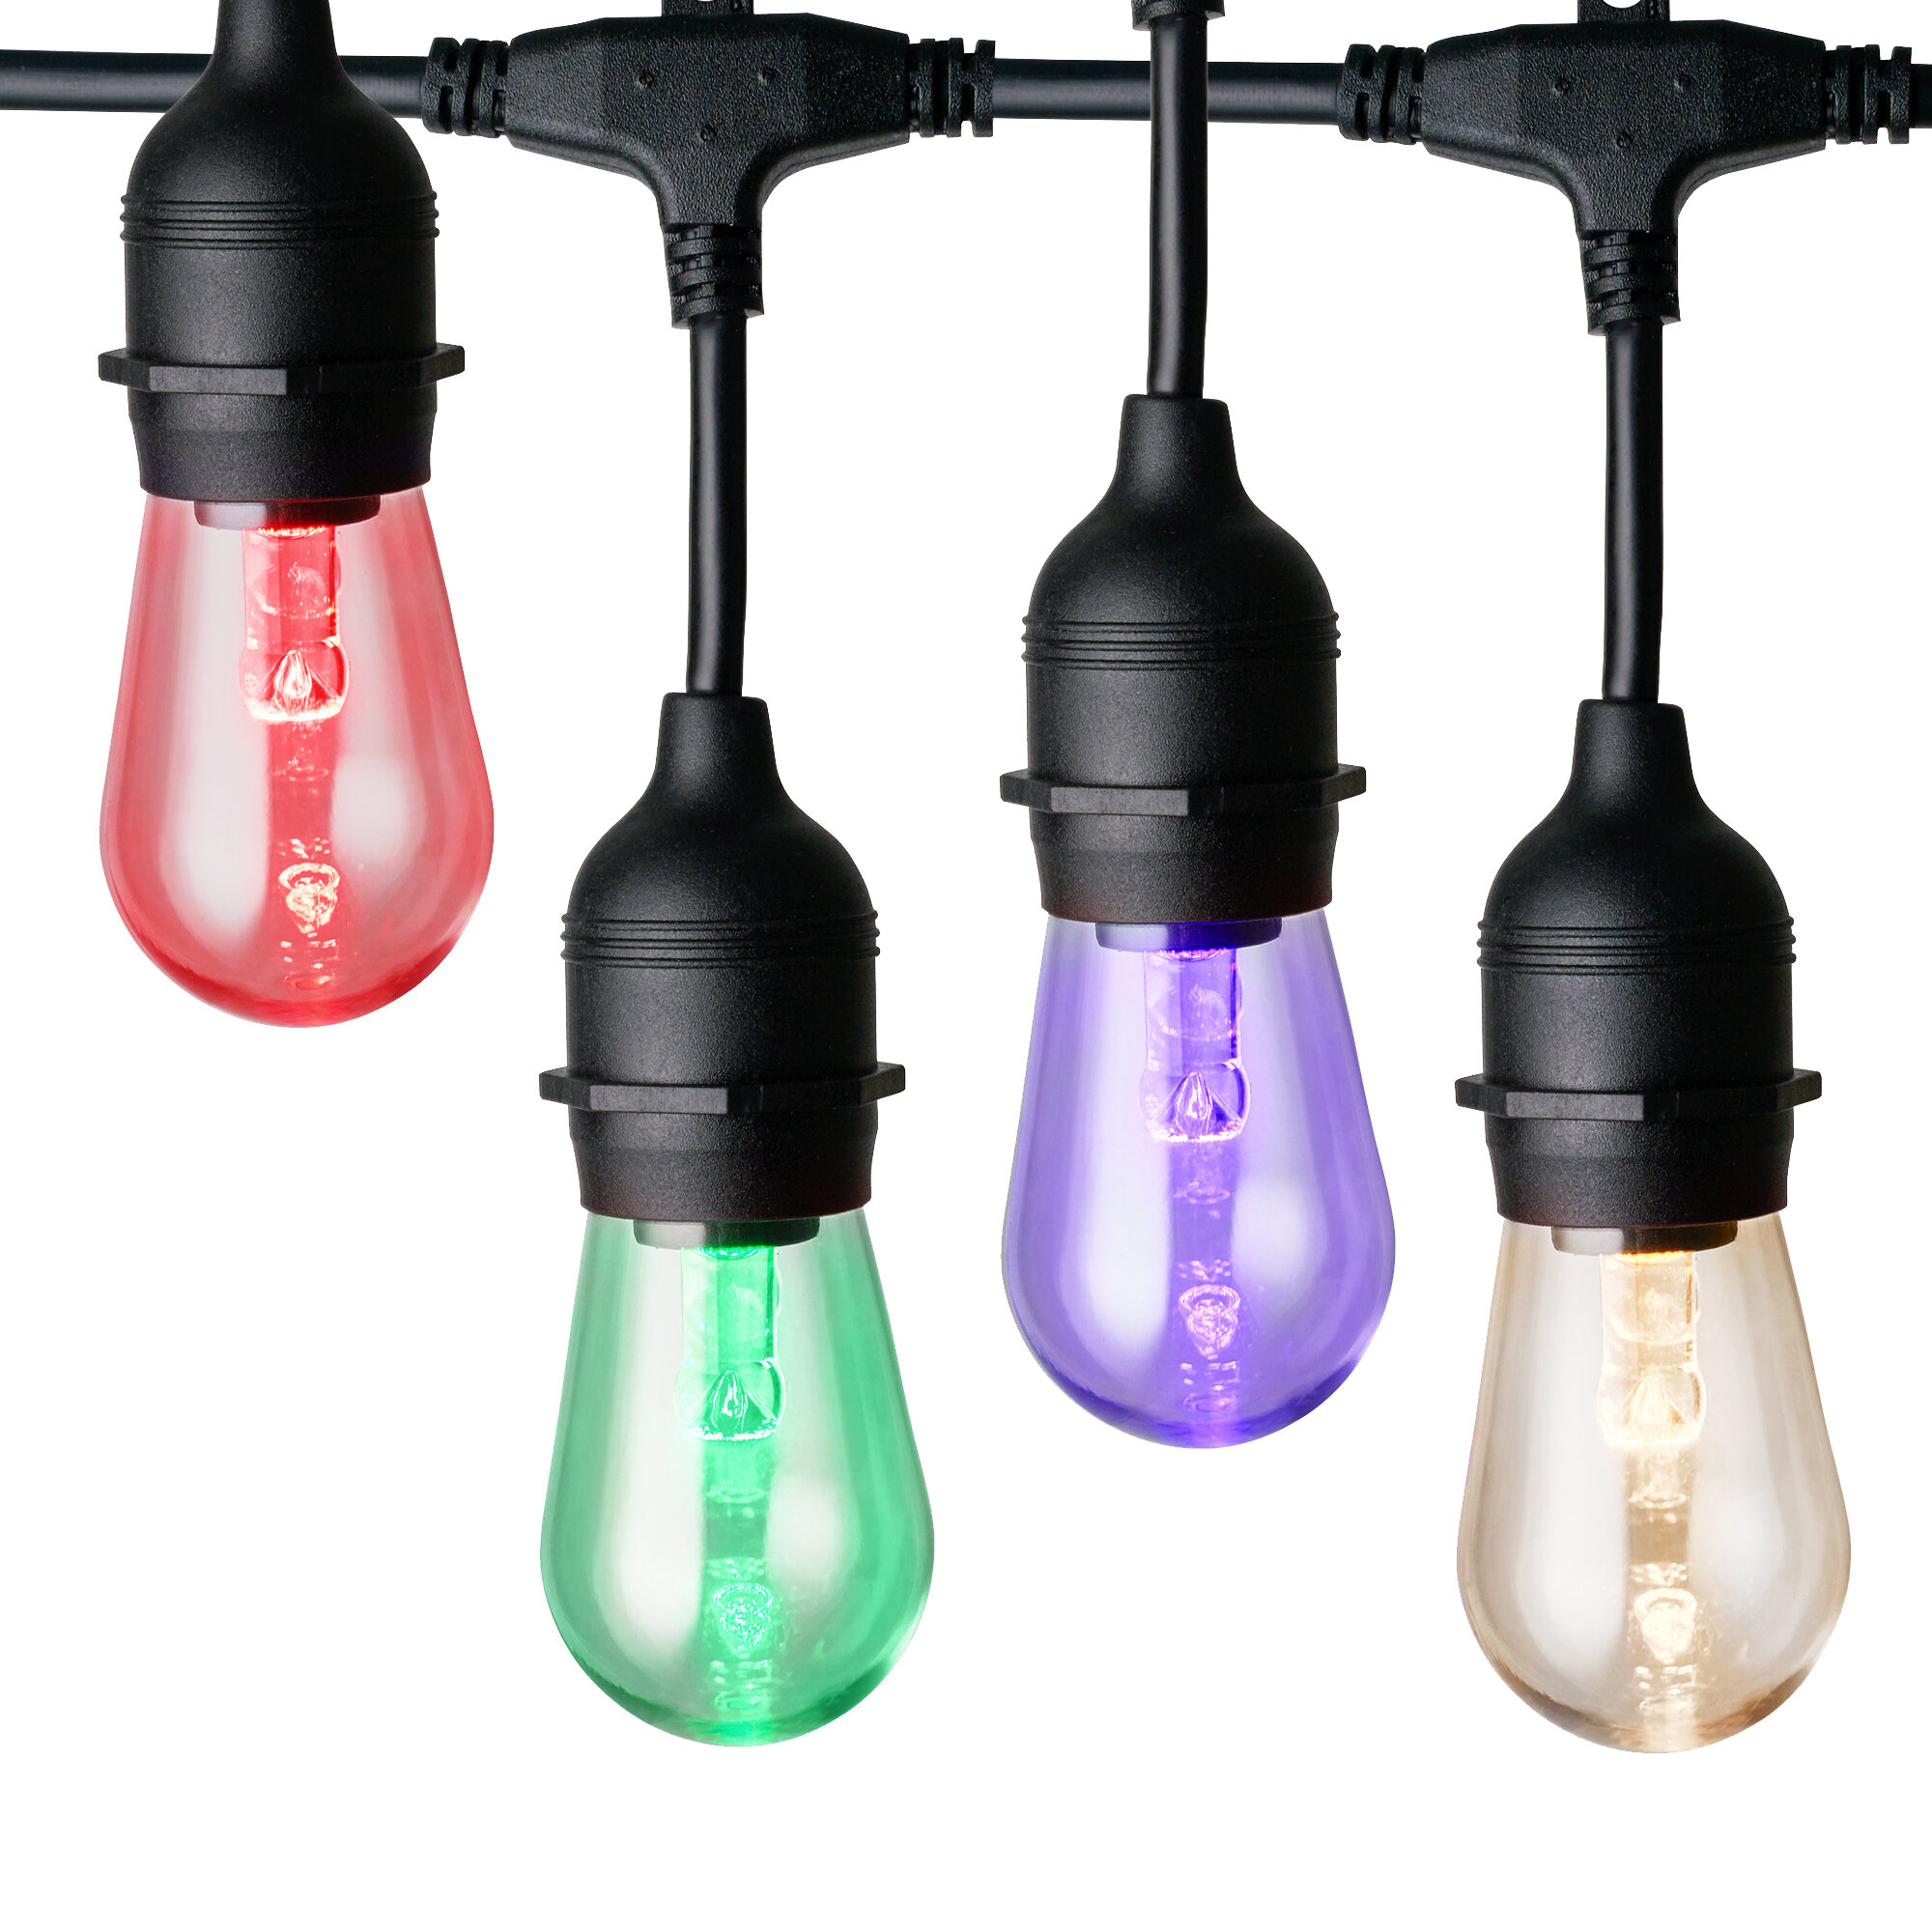 Honeywell 36' LED Color Changing String Light Set With Remote